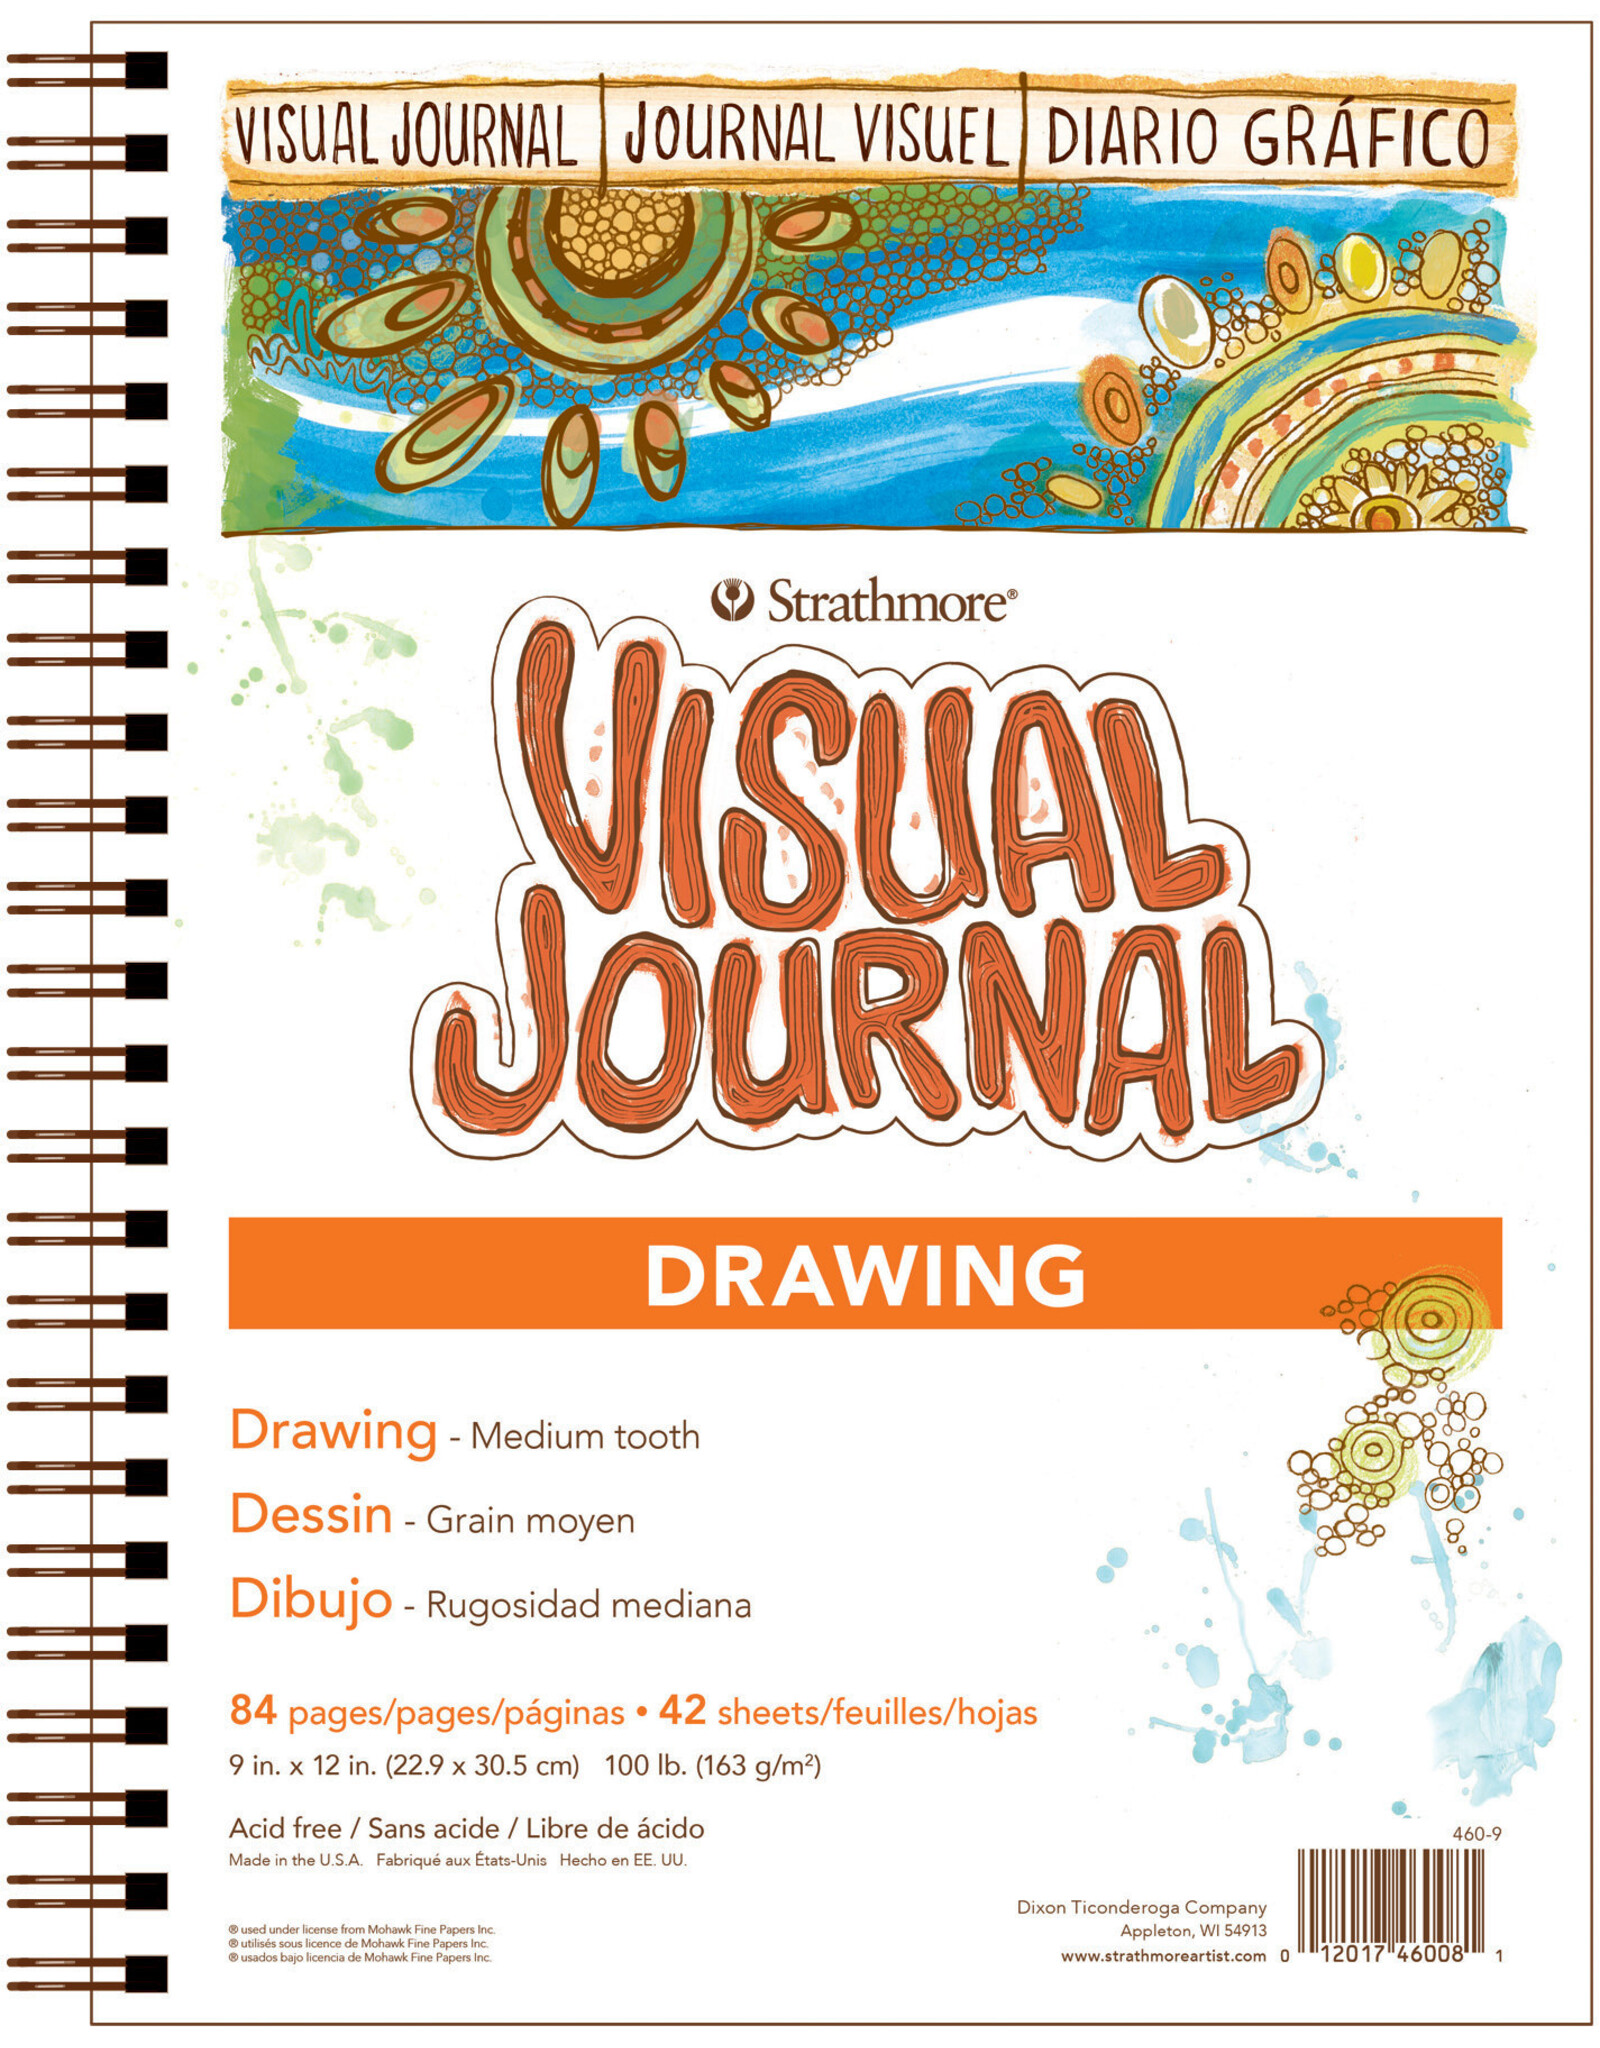 Strathmore Strathmore 500 Drawing Journal, 42 Sheets, 9” x 12”